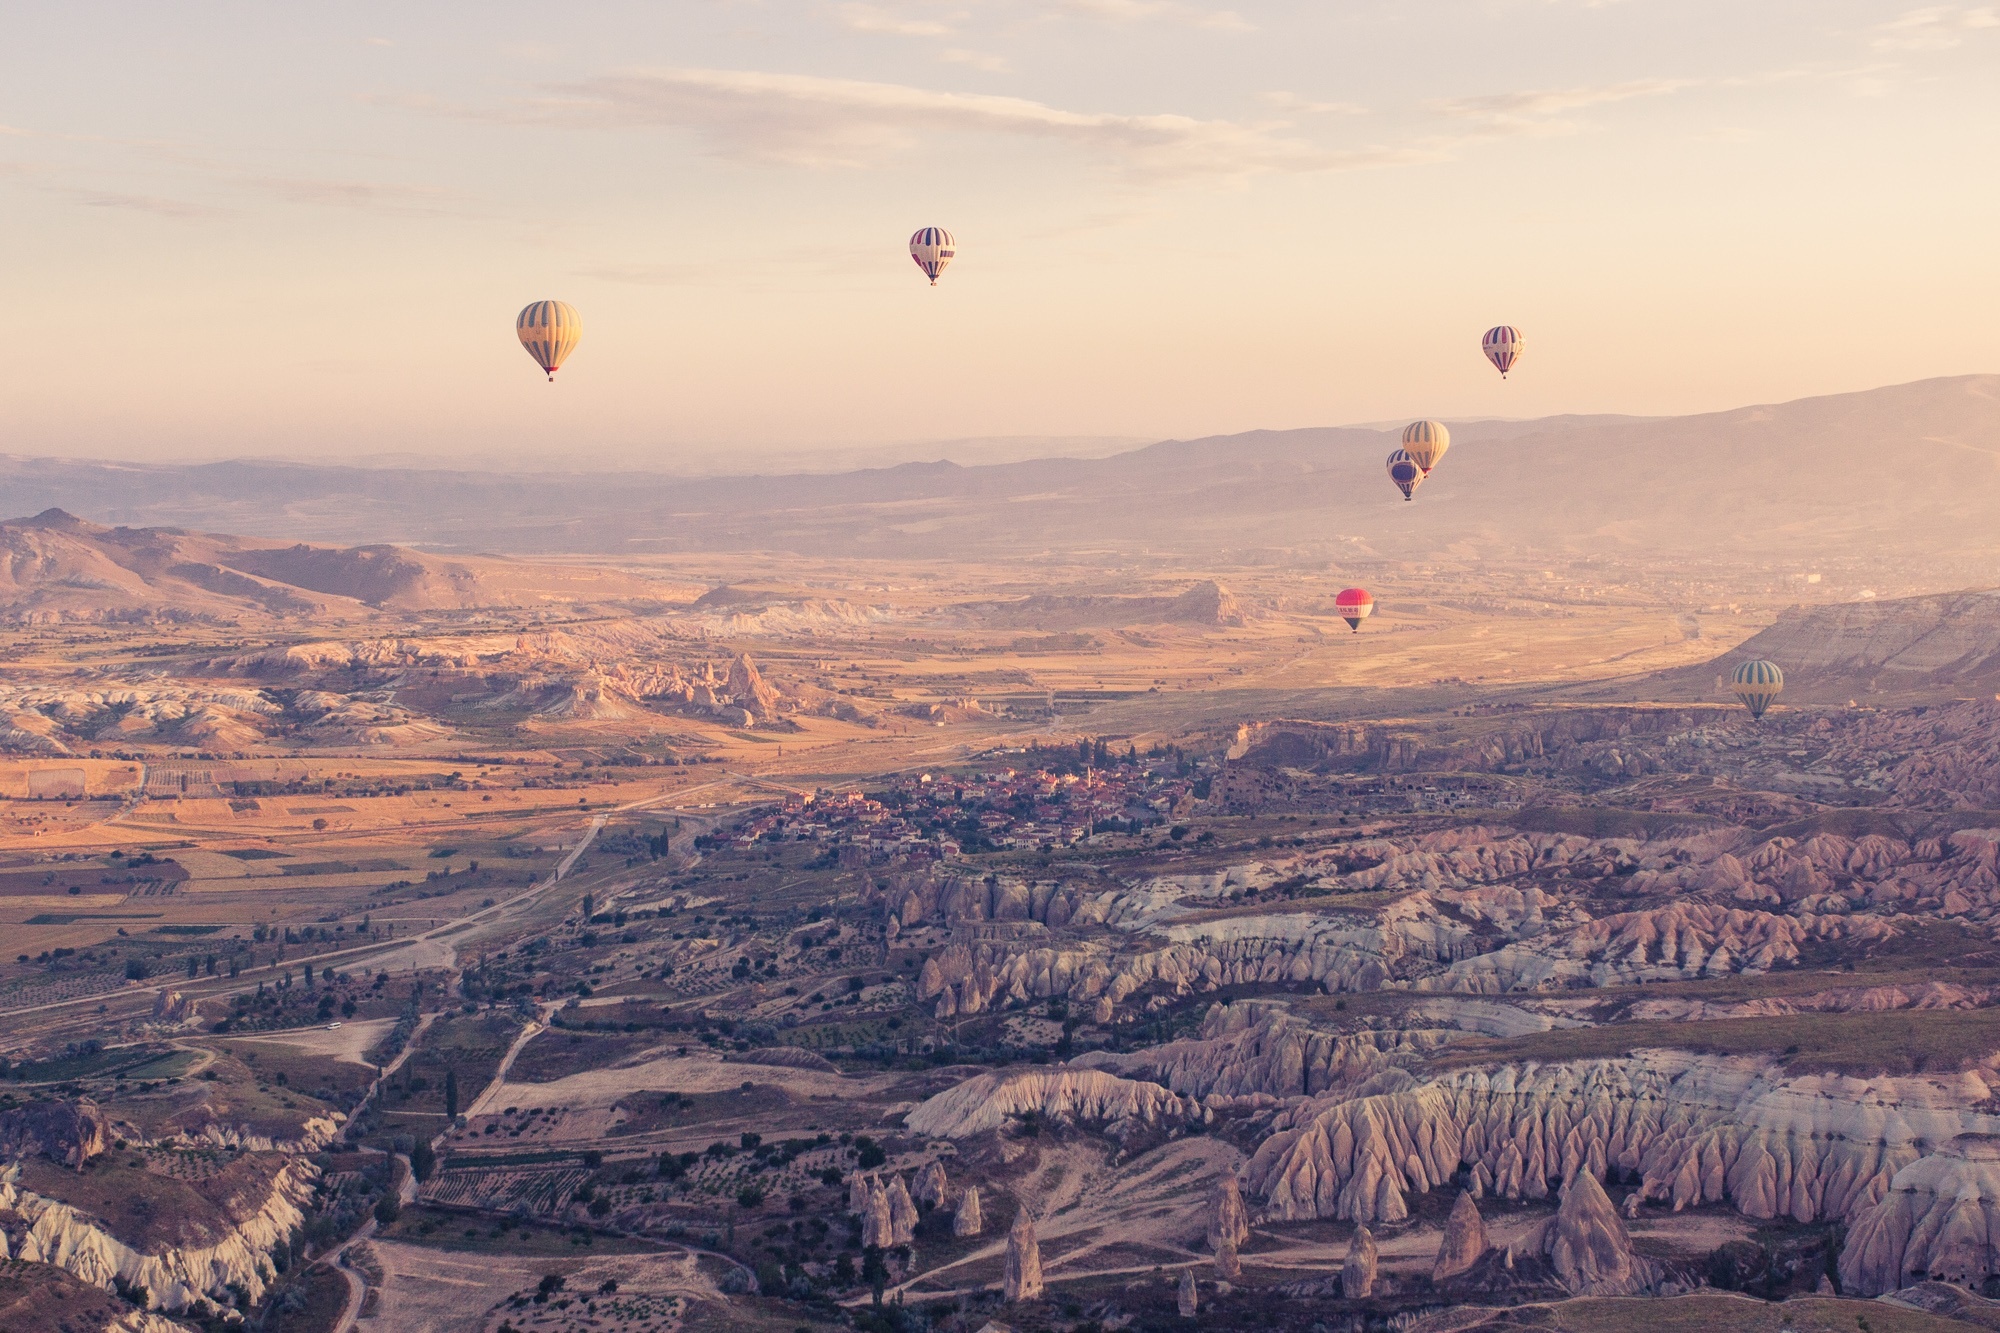 Air Sports: Extreme ballooning over the rock hills, Sunset time in mountains, Balloon festival. 2000x1340 HD Background.